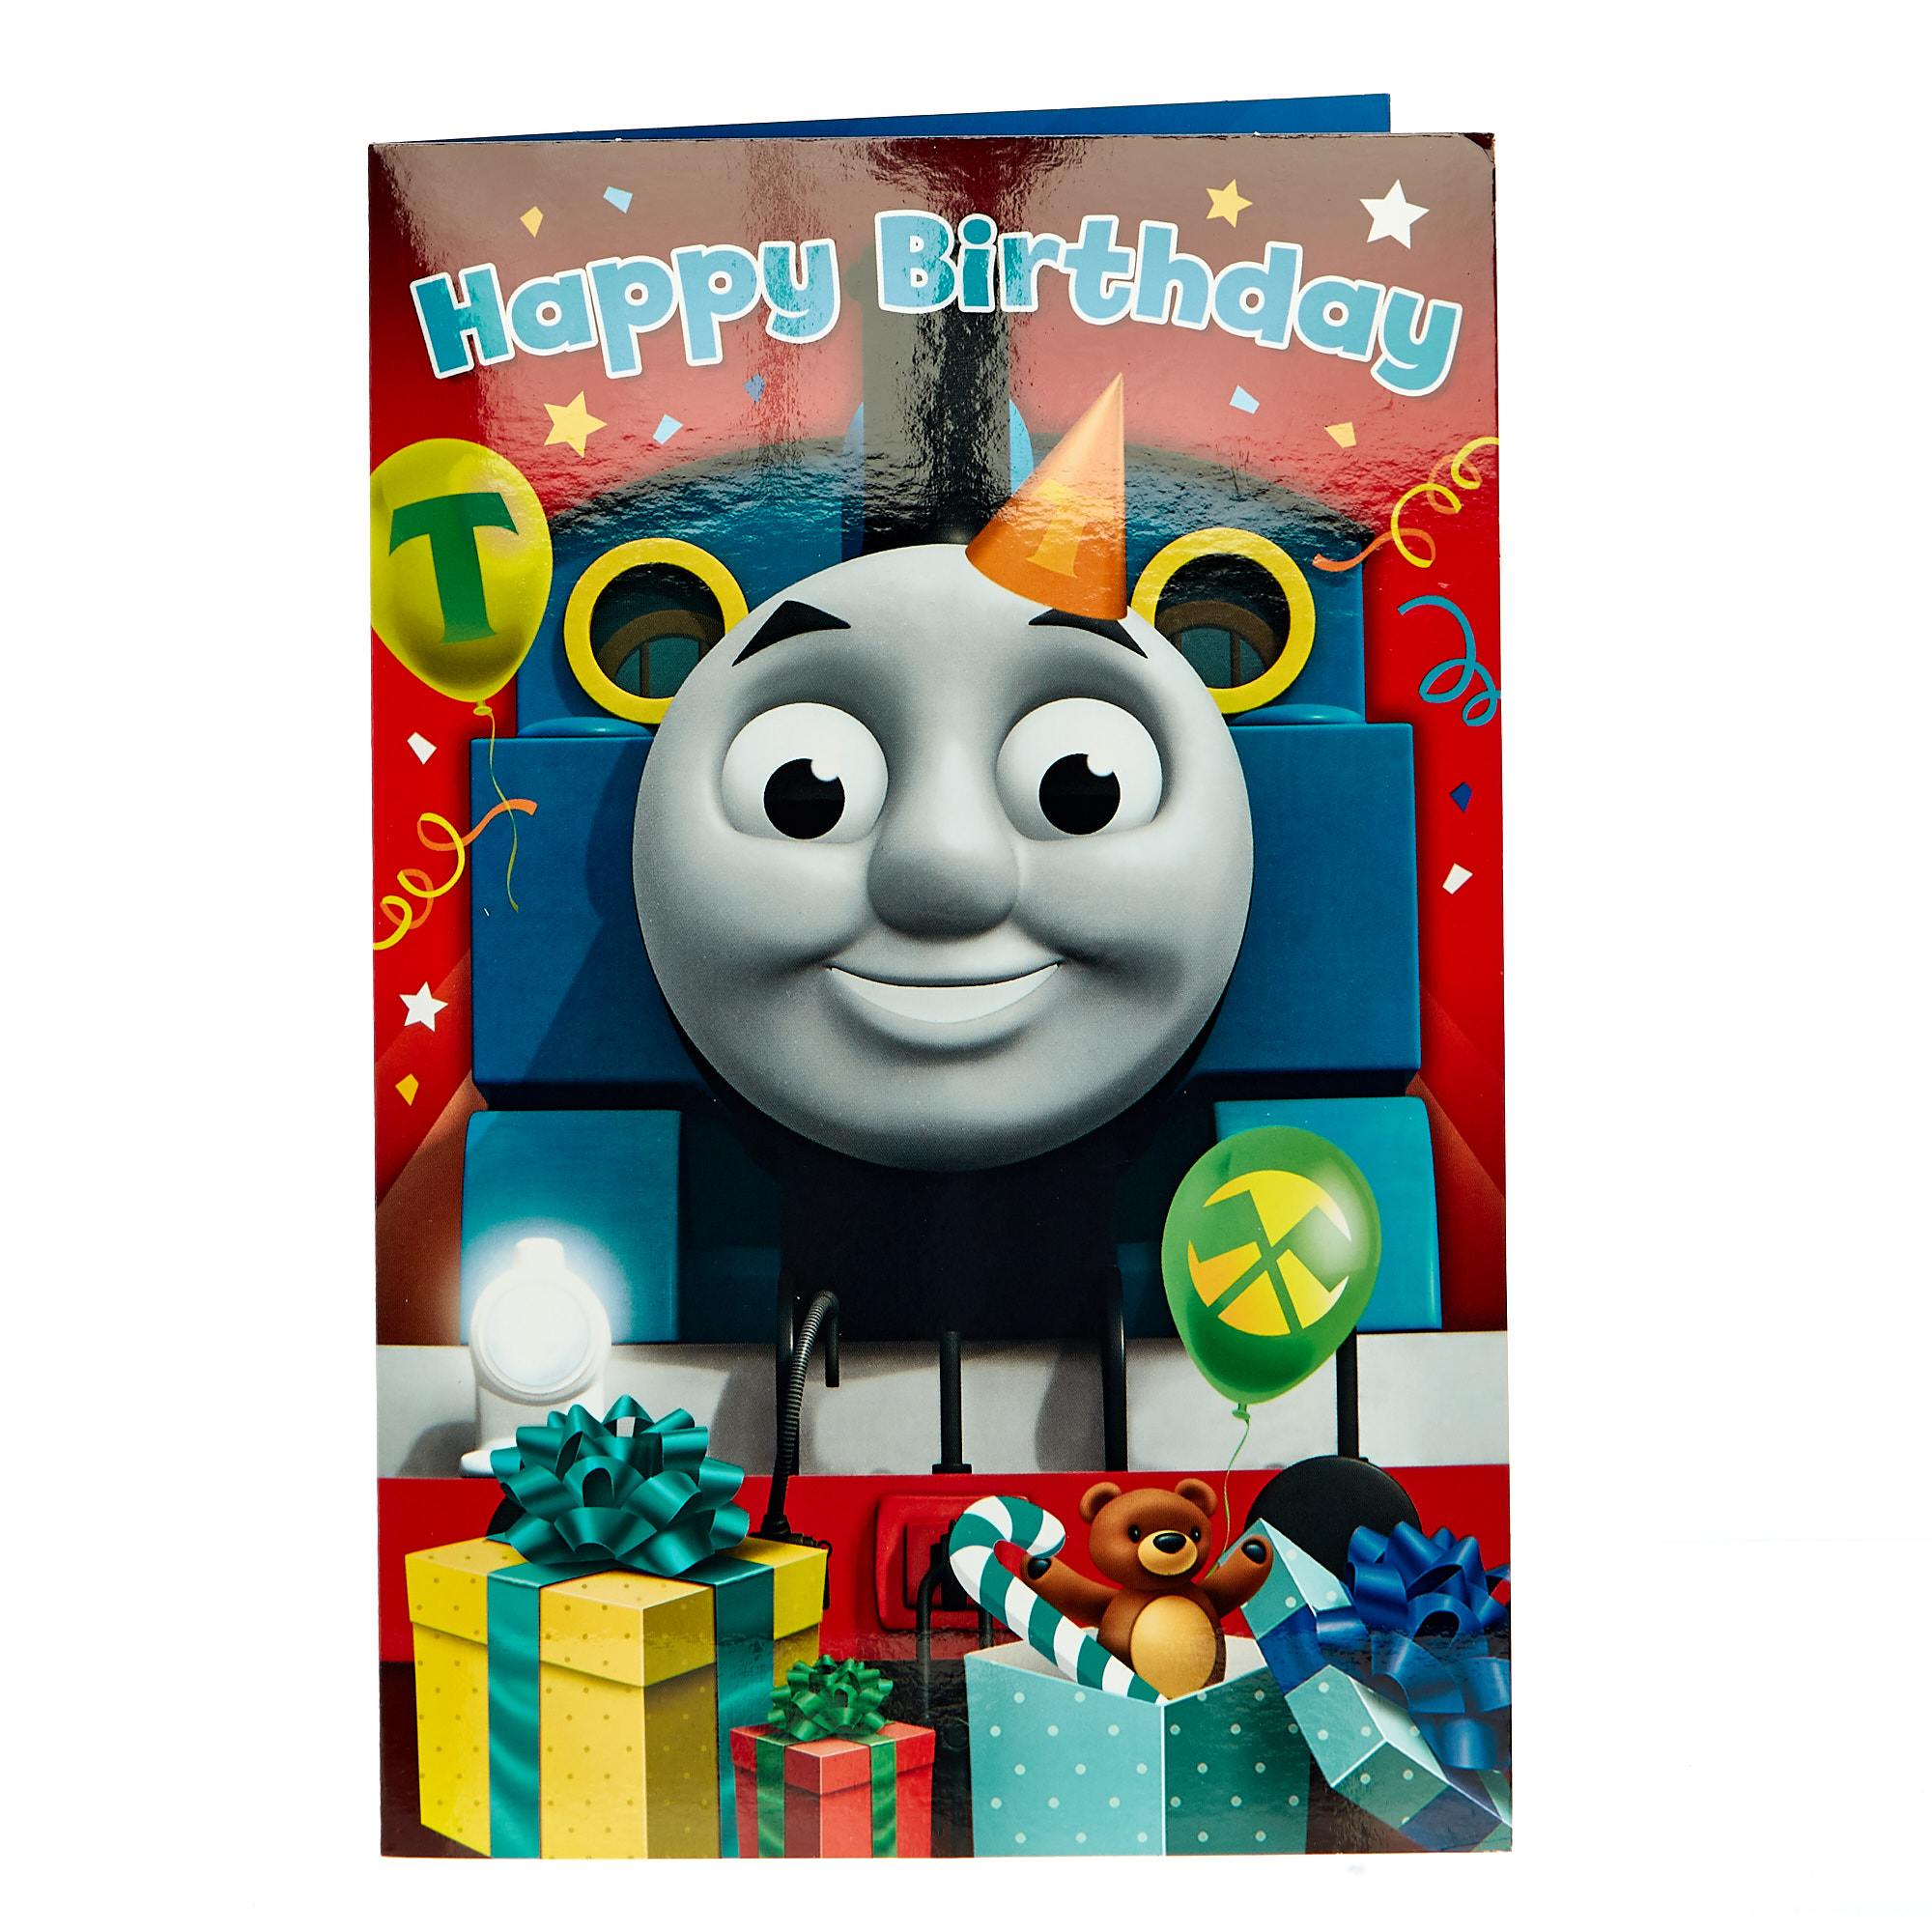 Buy Thomas & Friends Pop-Up Birthday Card for GBP 1.49 | Card Factory UK